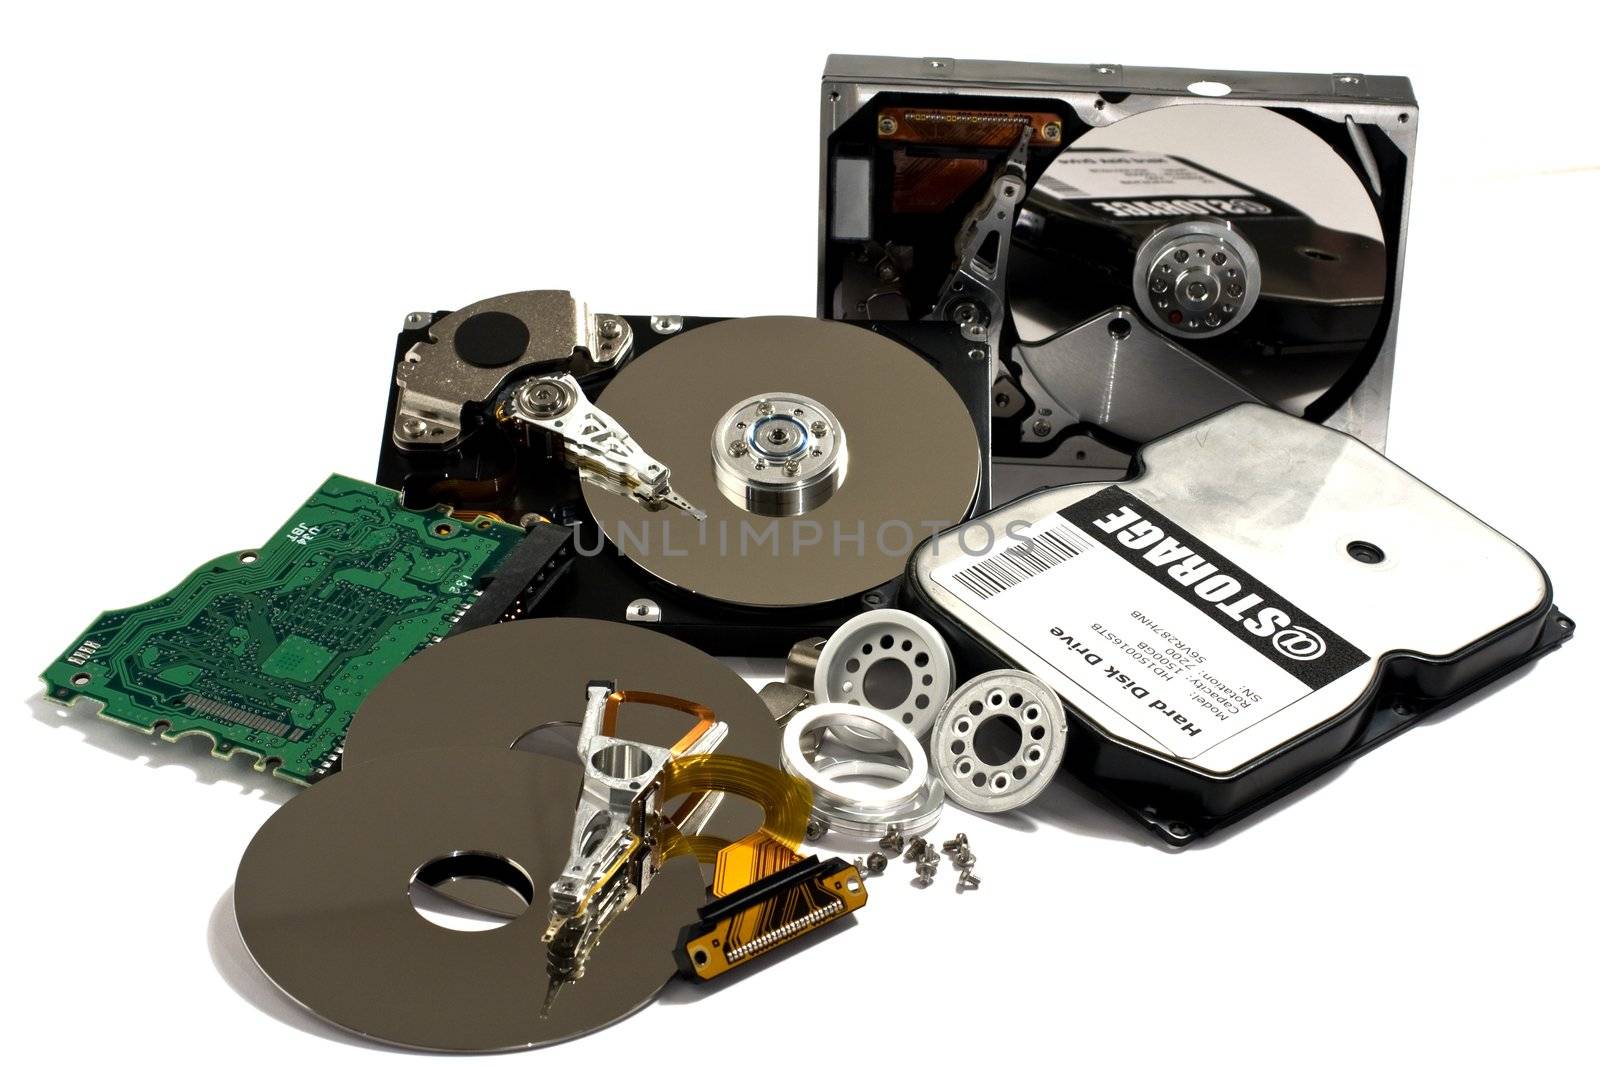 Diffenrent parts of hard drive by gewoldi